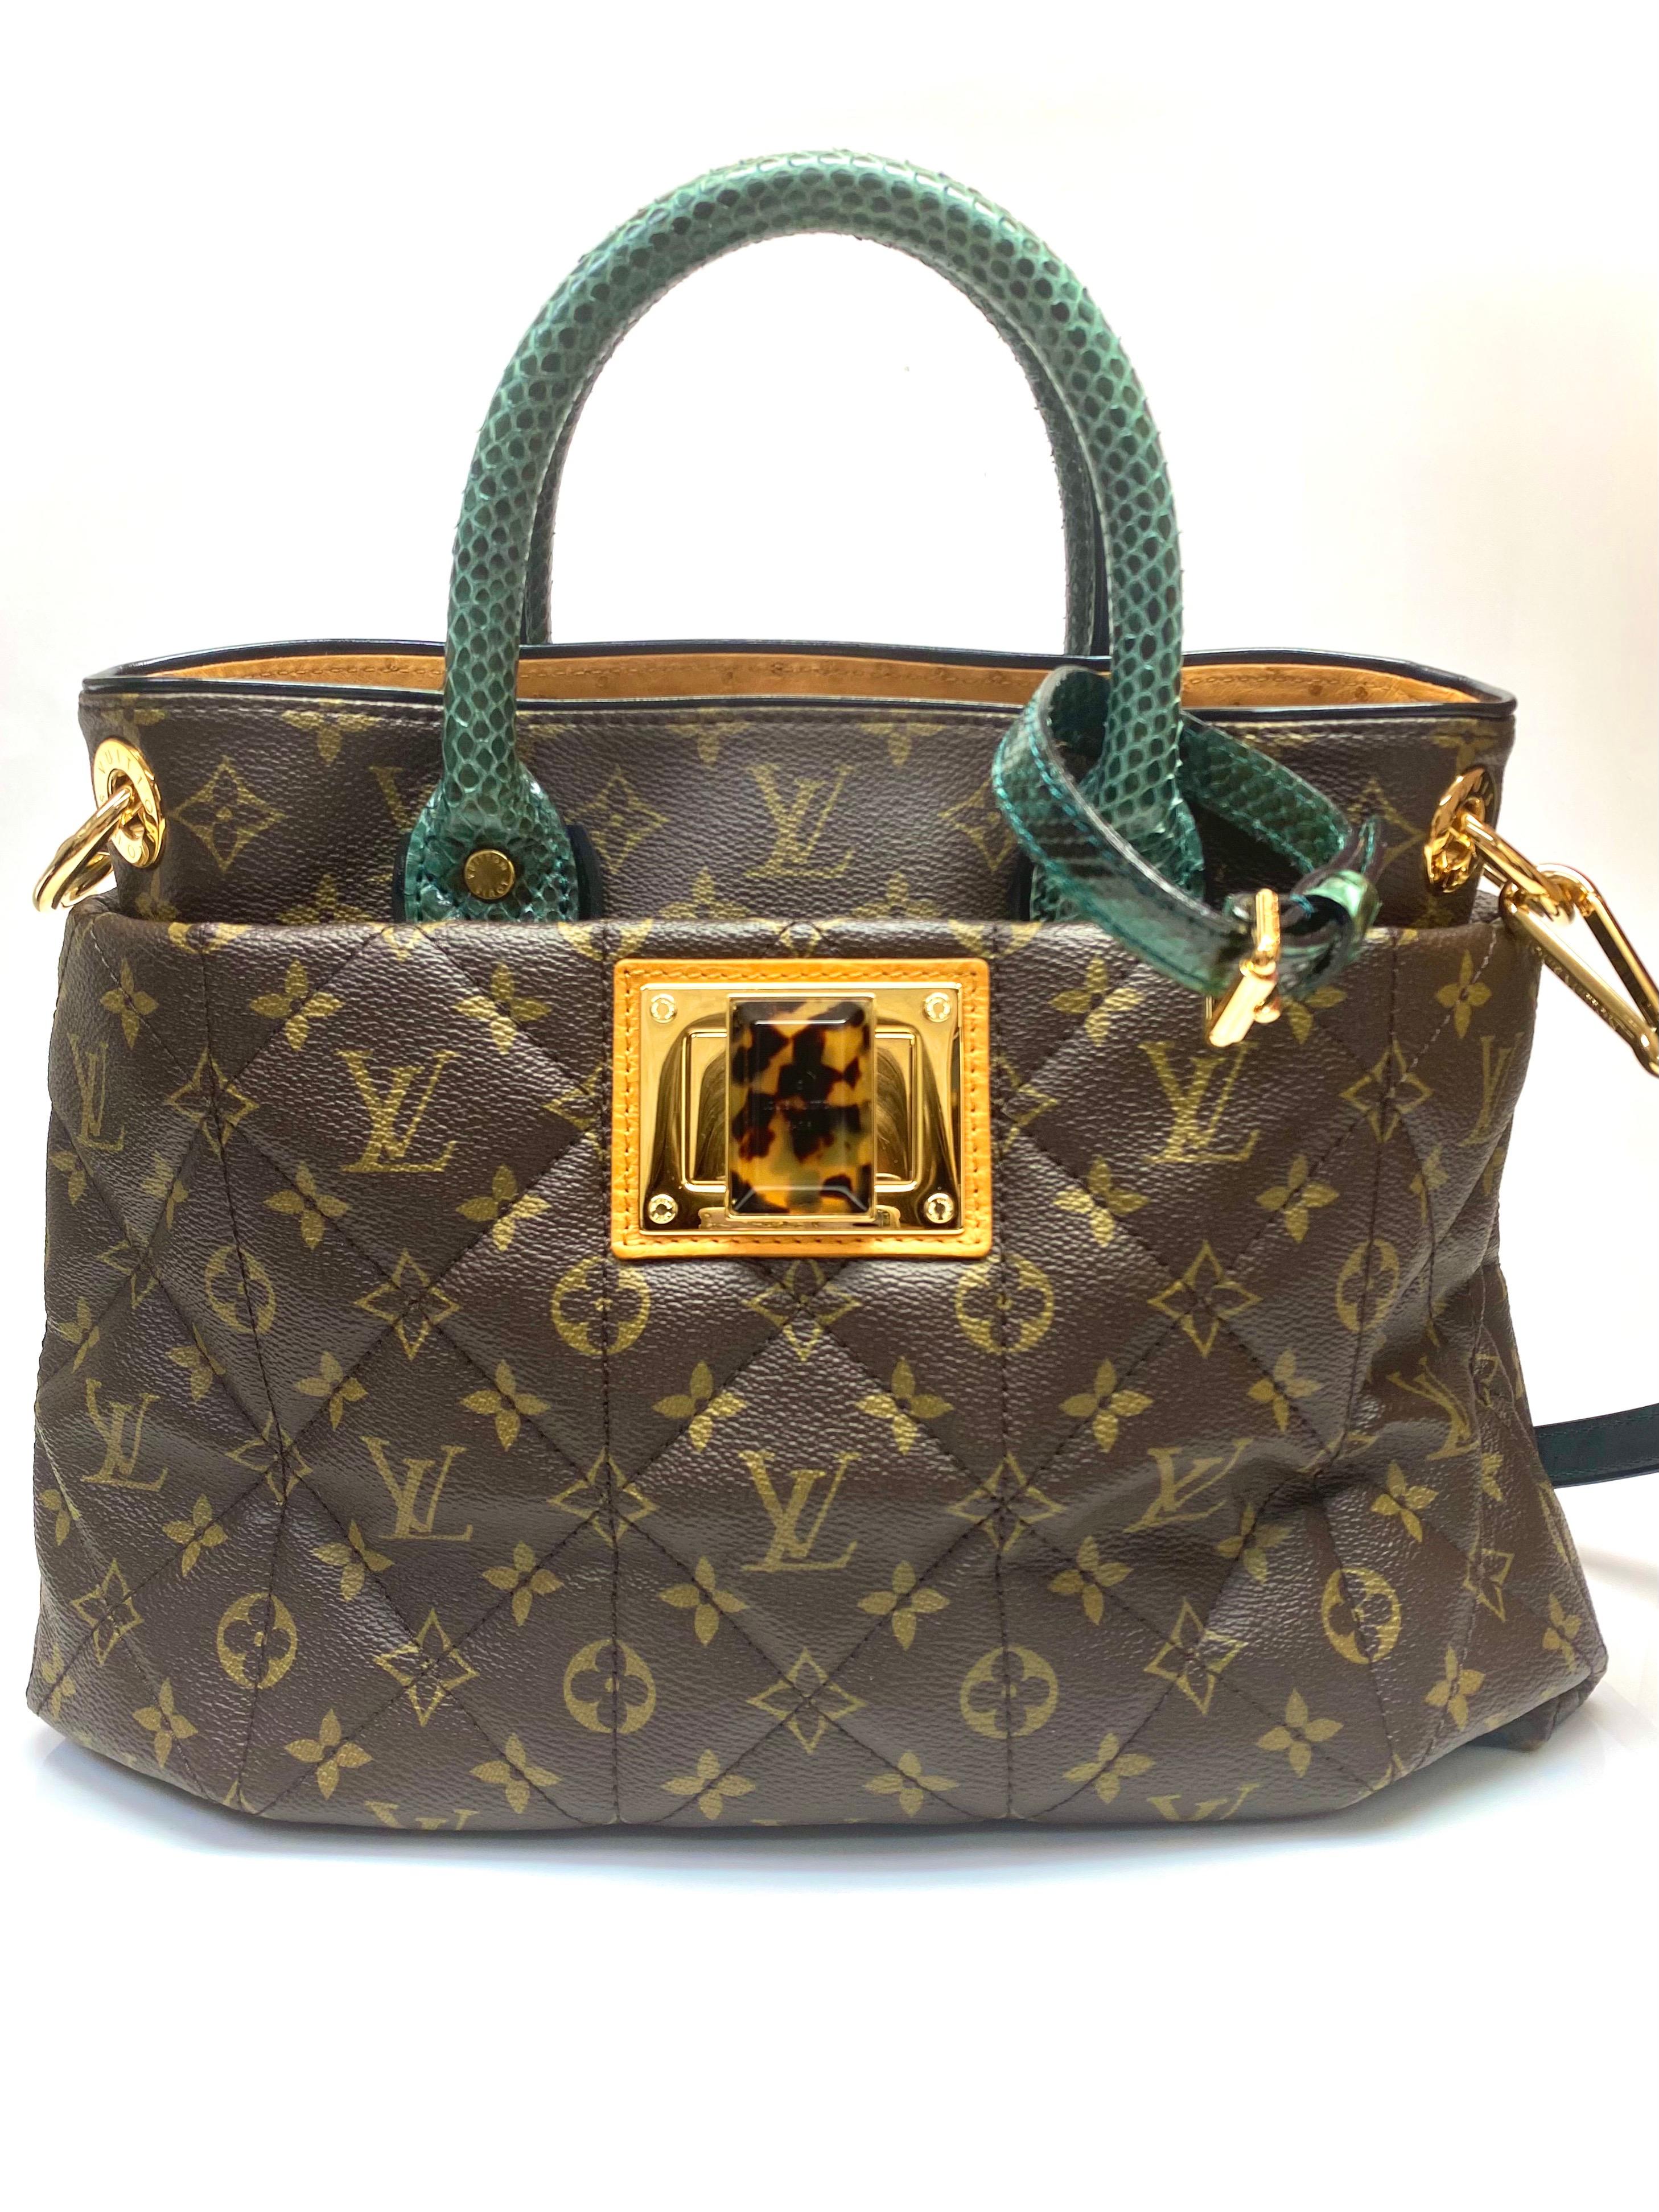 This exotic Louis Vuitton MM features a quilted monogram canvas body with ostrich leather trim, rolled python leather handles, a detachable flat leather strap, an open top with a gold-tone and tortoise shell lock closure, and interior zip and slip